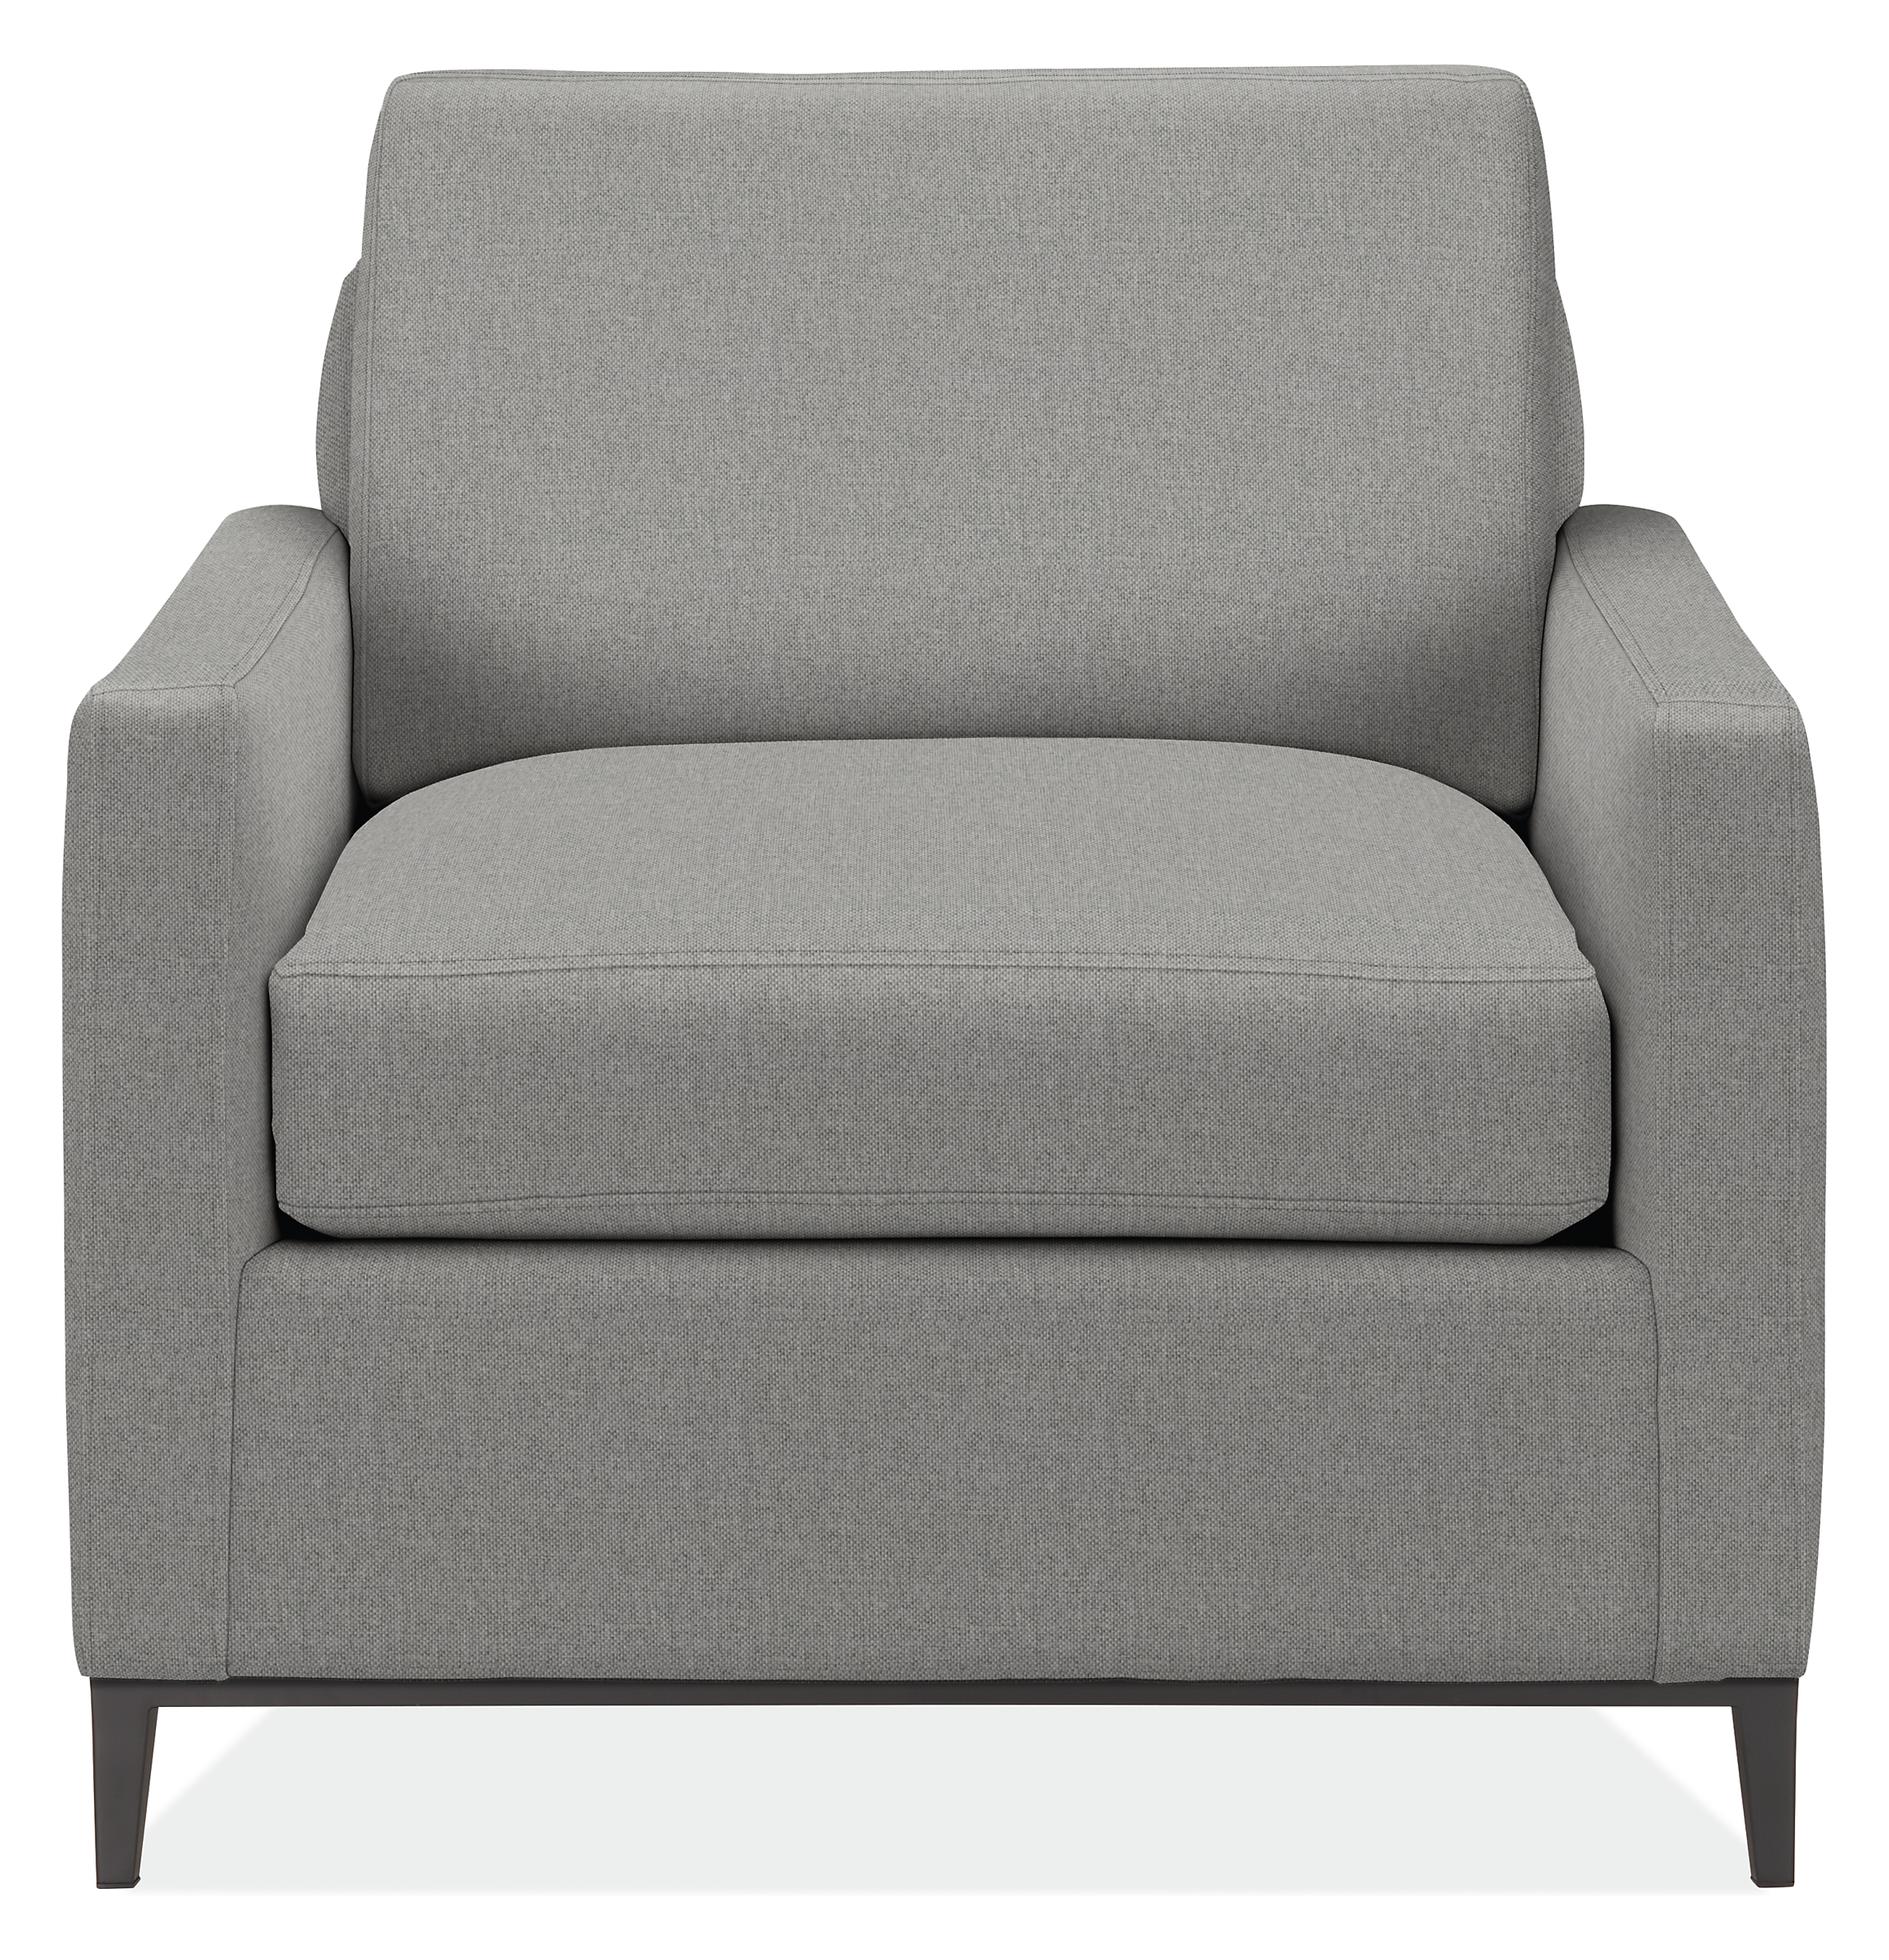 Front view of Tomas Chair in Mist Fabric.